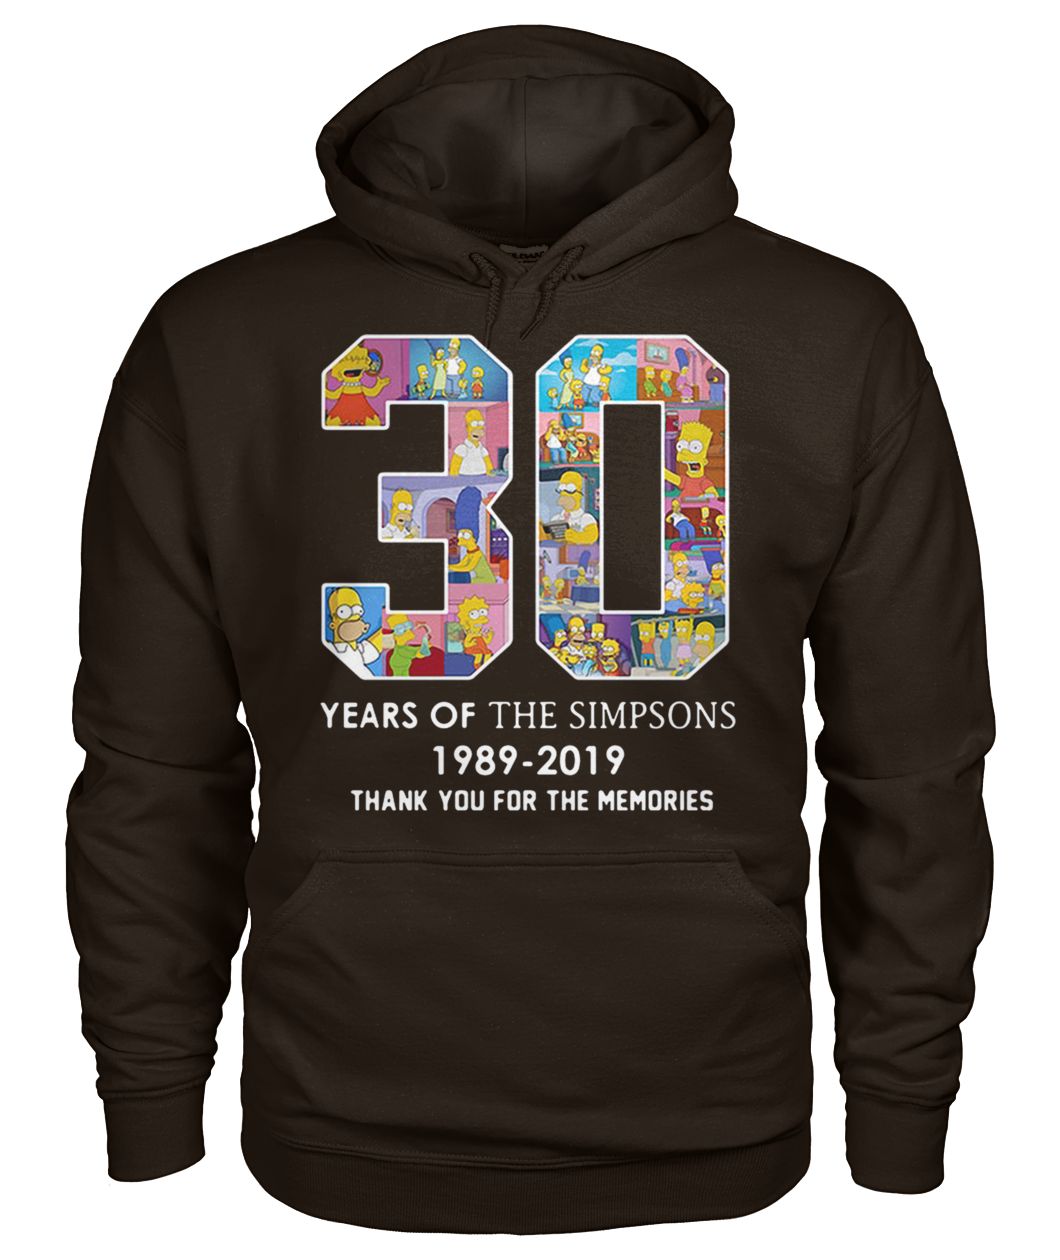 30 years of the Simpsons 1989 2019 thank you for the memories gildan hoodie